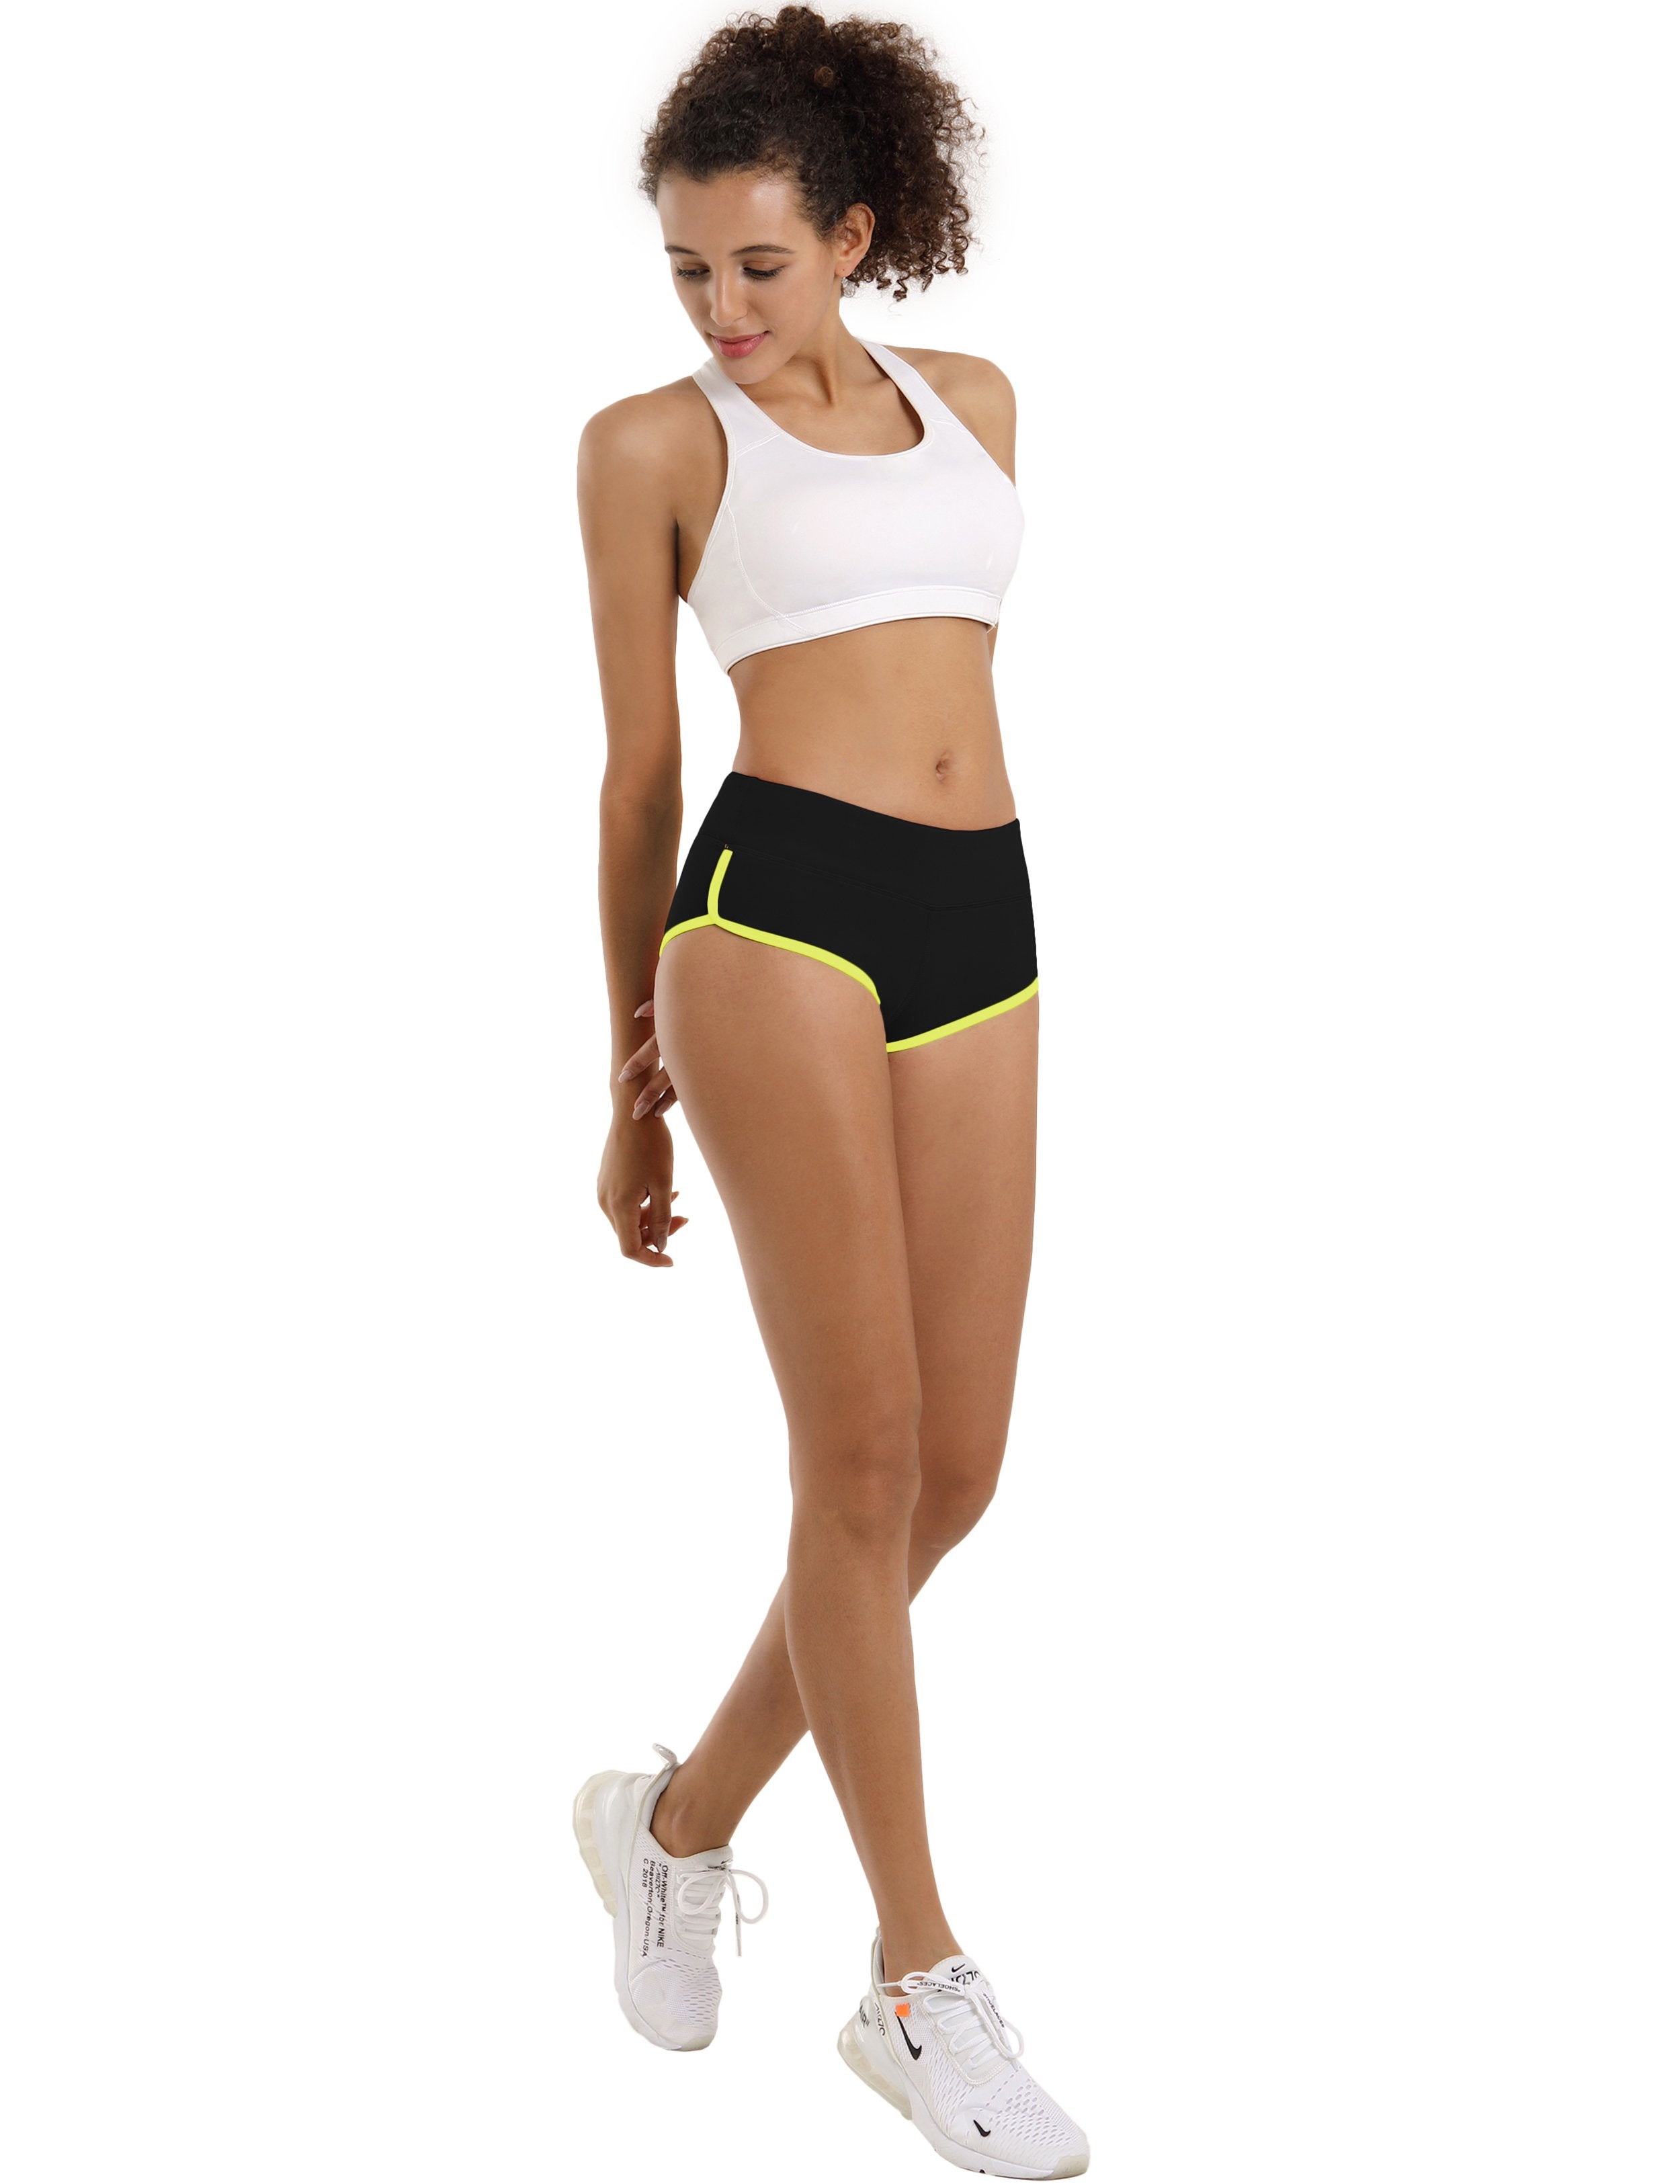 Sexy Booty Tall Size Shorts black_fluorescentyellow Sleek, soft, smooth and totally comfortable: our newest sexy style is here. Softest-ever fabric High elasticity High density 4-way stretch Fabric doesn't attract lint easily No see-through Moisture-wicking Machine wash 75%Nylon/25%Spandex